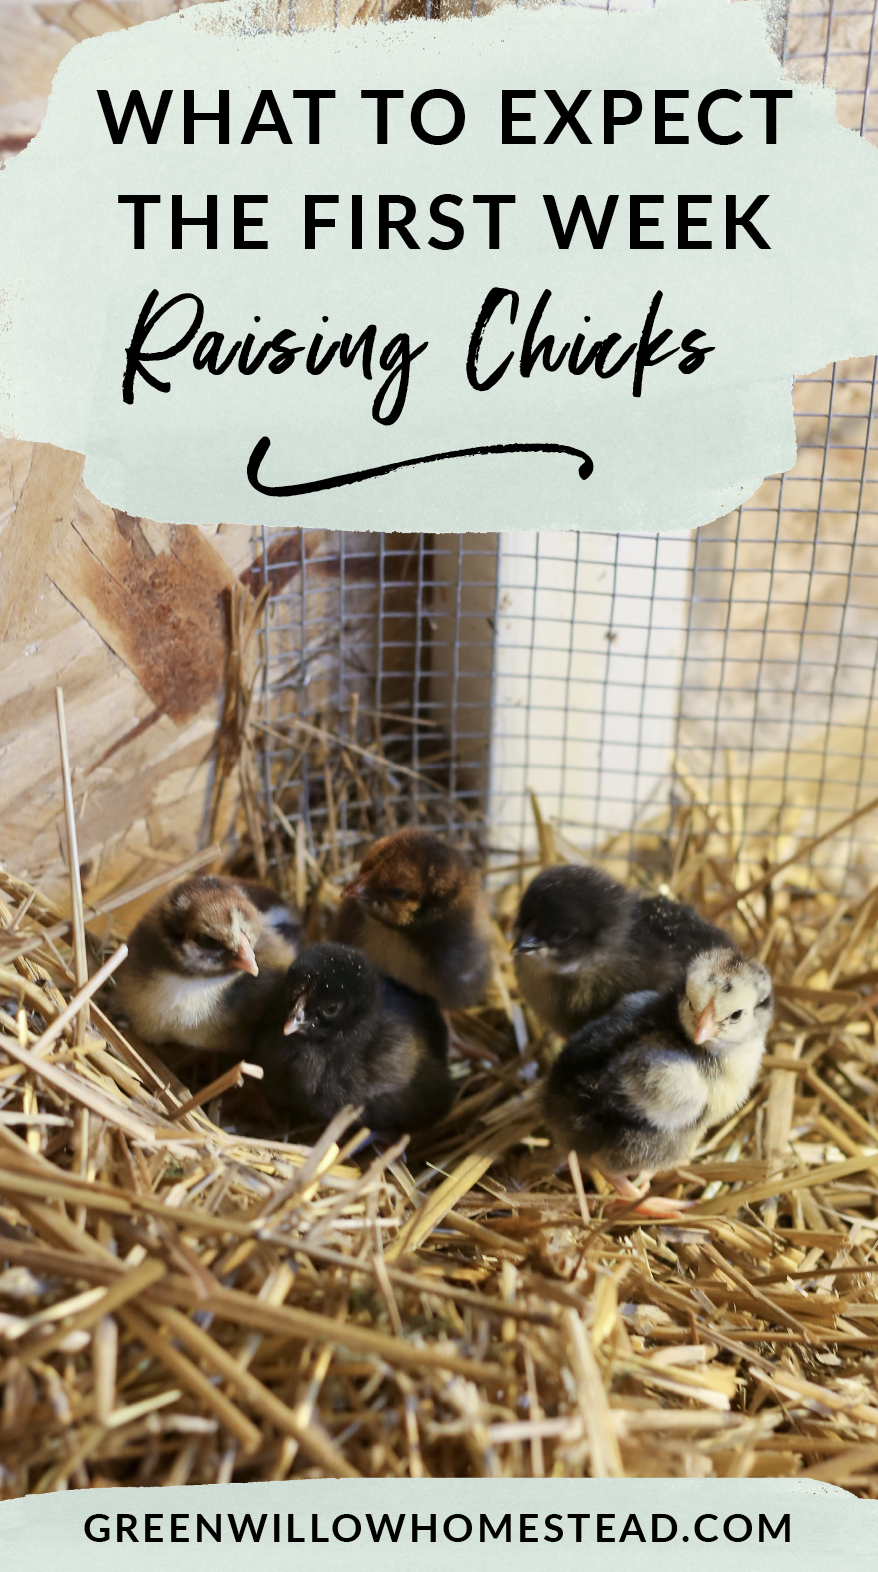 What to expect the first week of raising chicks in a brooder